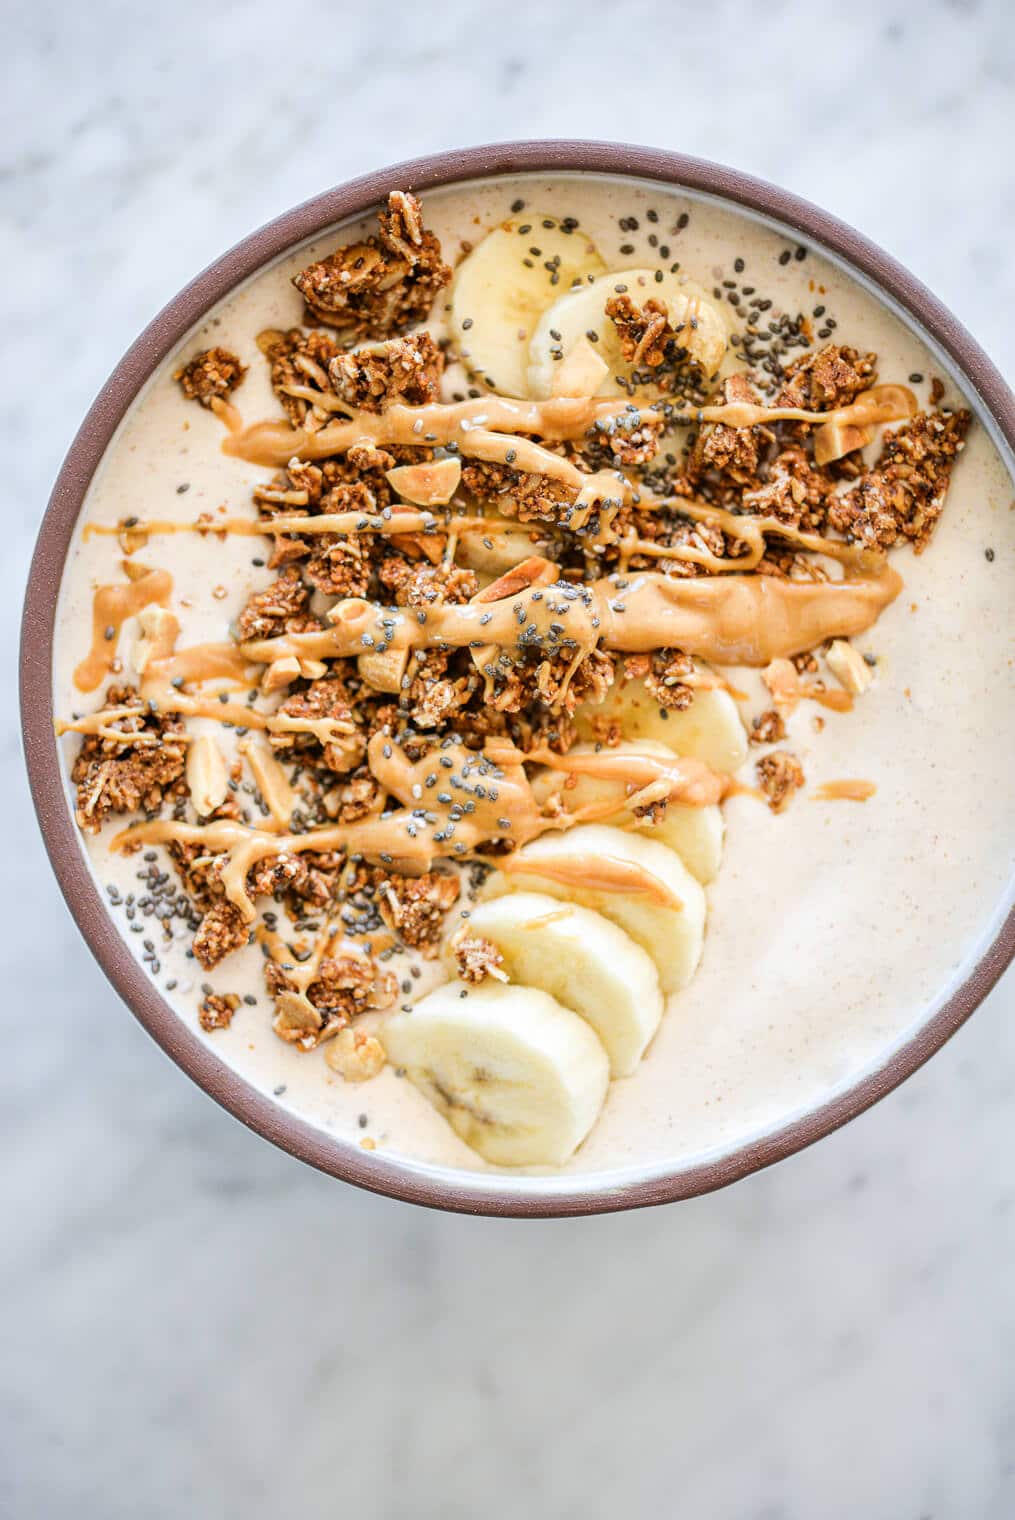 Banana smoothie bowl topped with sliced banana, granola, chia seeds, and a drizzle of peanut butter